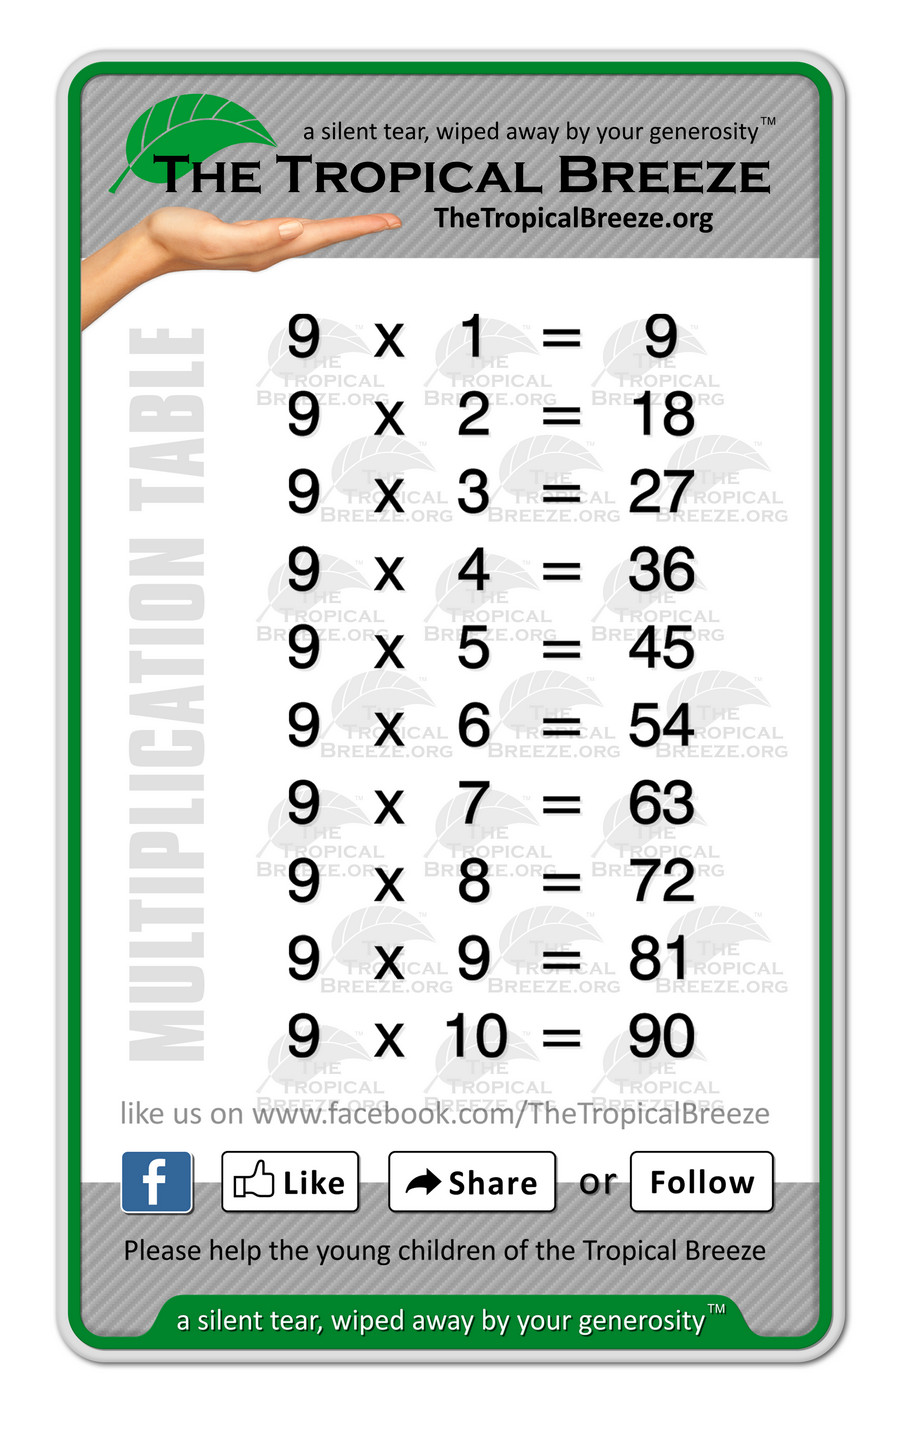 Download_free_math_multiplication_tables_from_www.TheTropicalBreeze.org - 9x